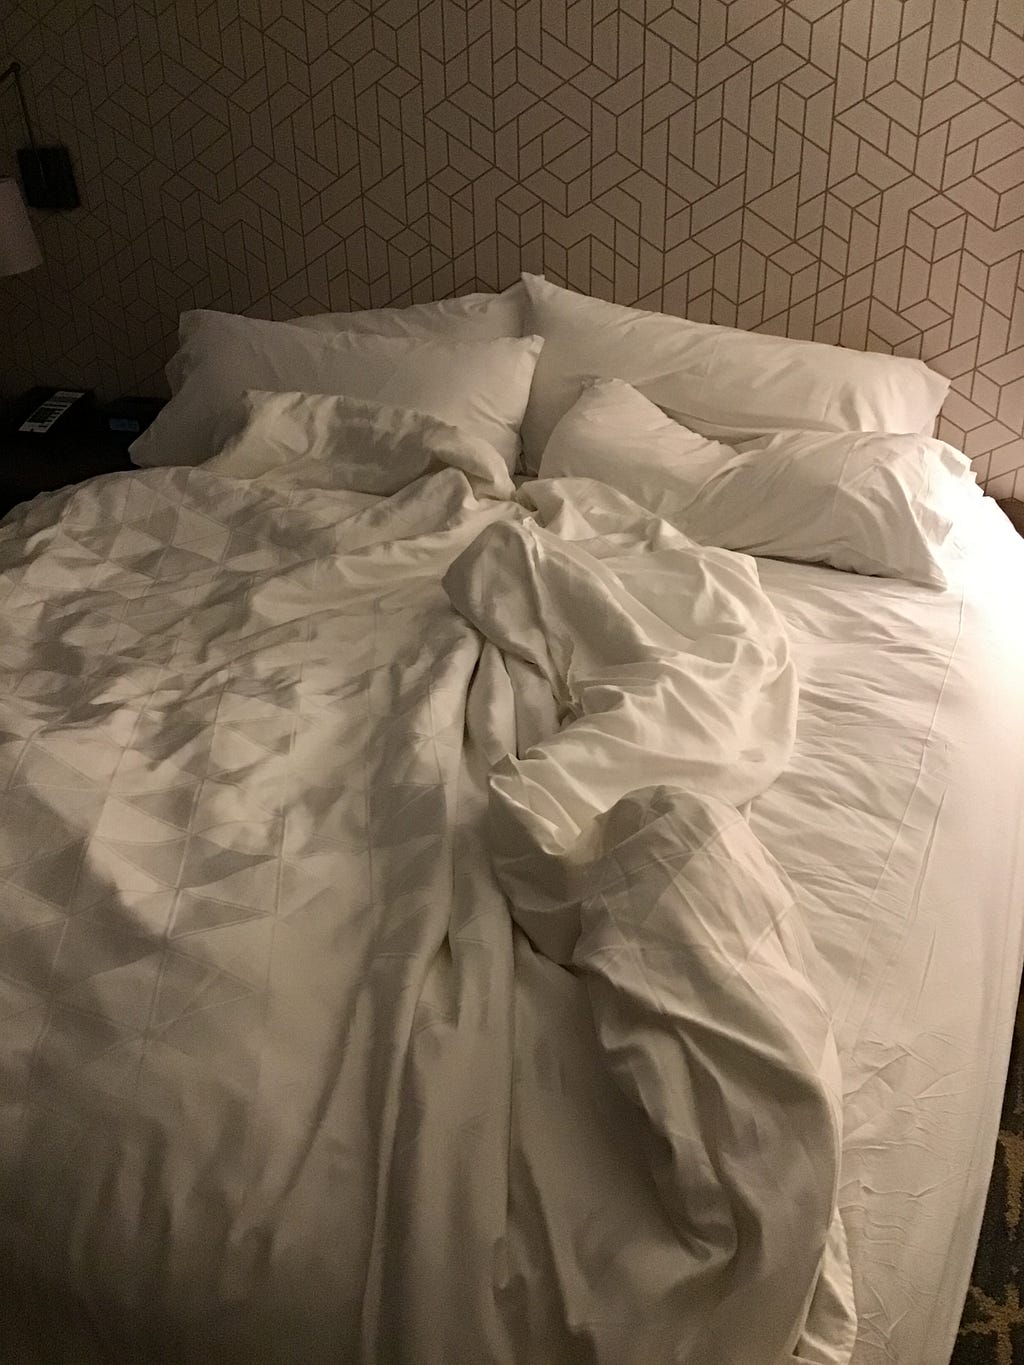 A bed with rumpled white sheets